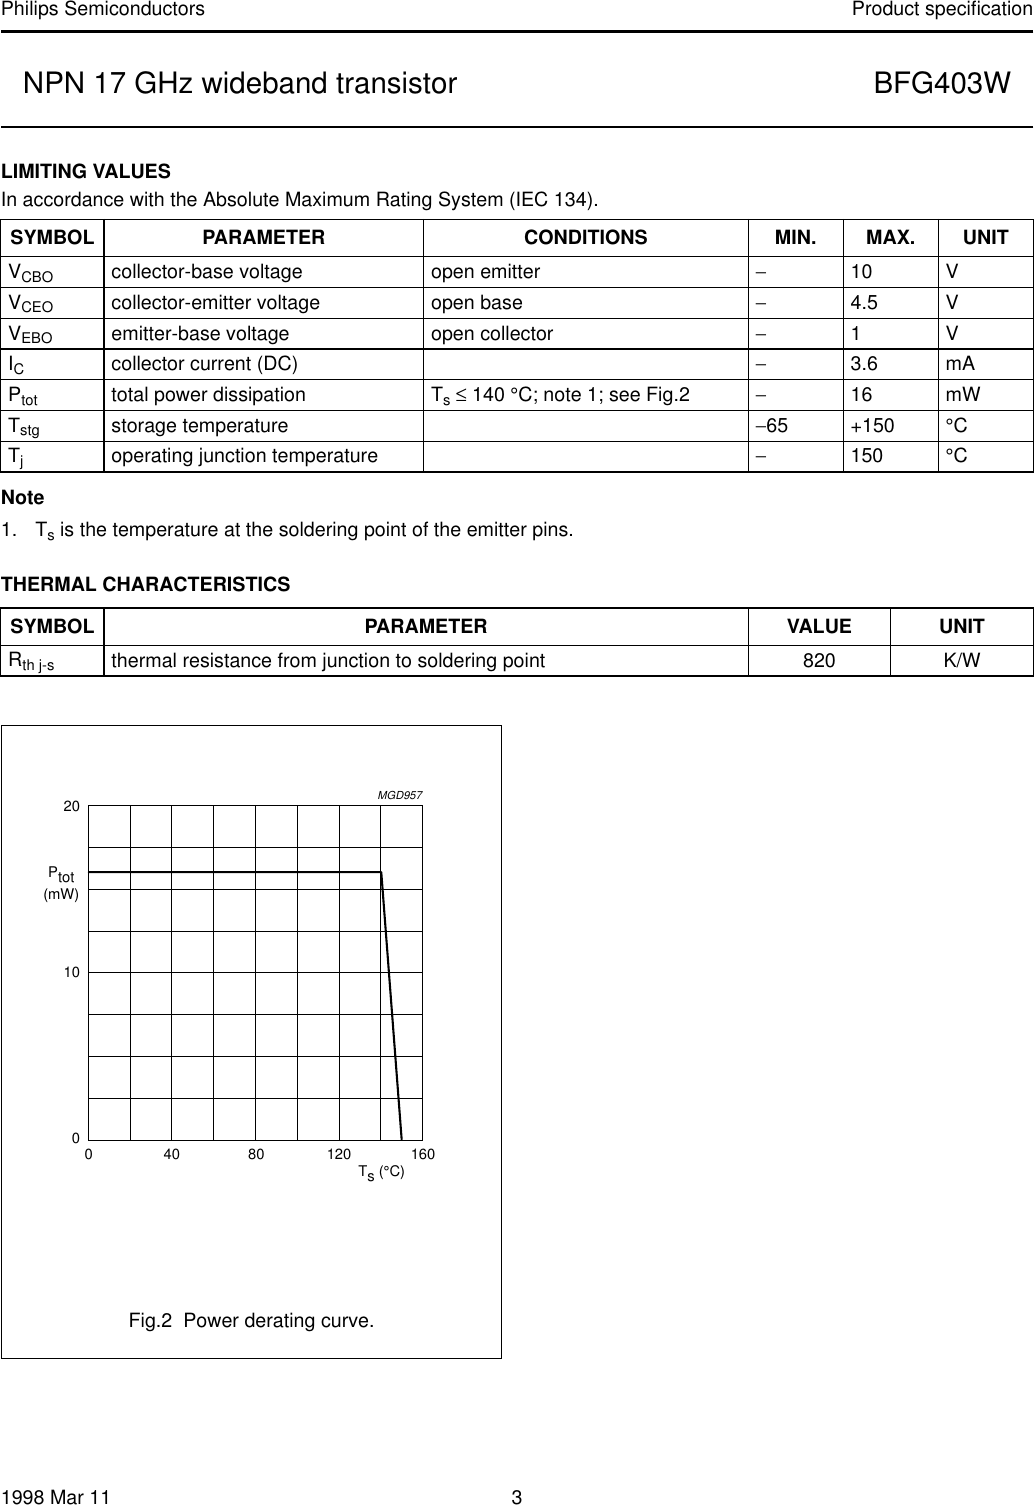 Page 3 of 12 - NPN 17 GHz Wideband Transistor Bfg403w Philips